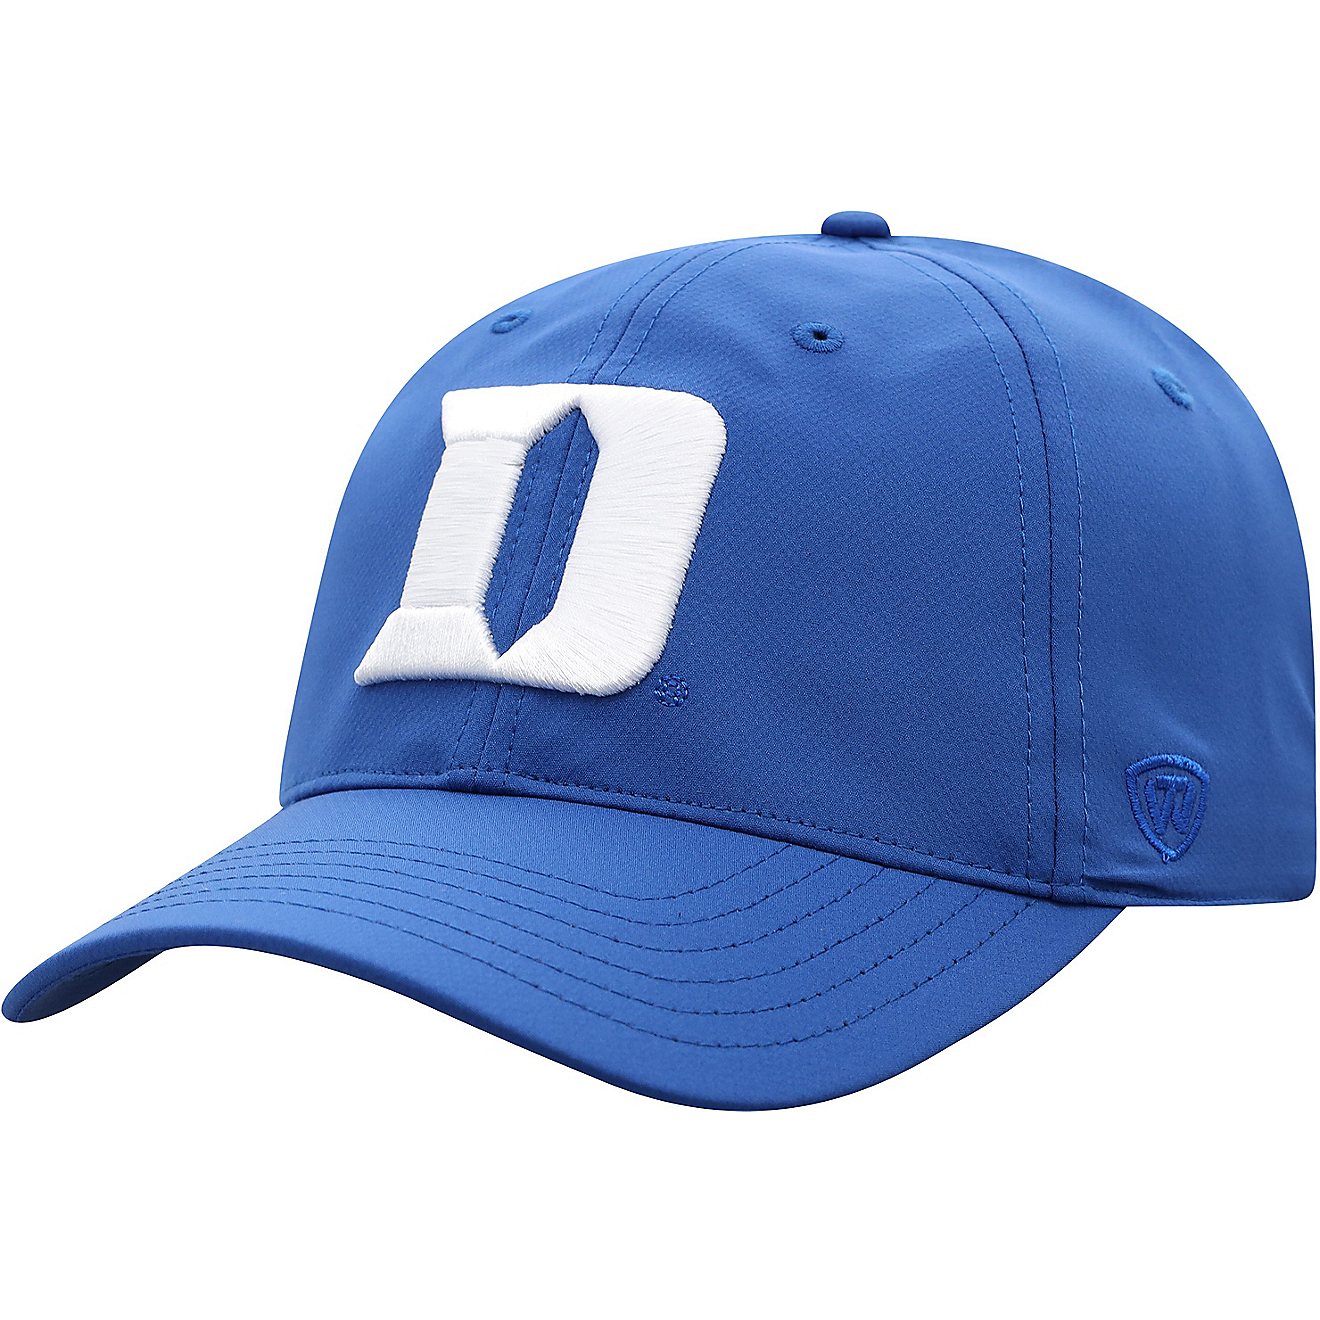 Top of the World Duke University Trainer 20 Adjustable Cap                                                                       - view number 1